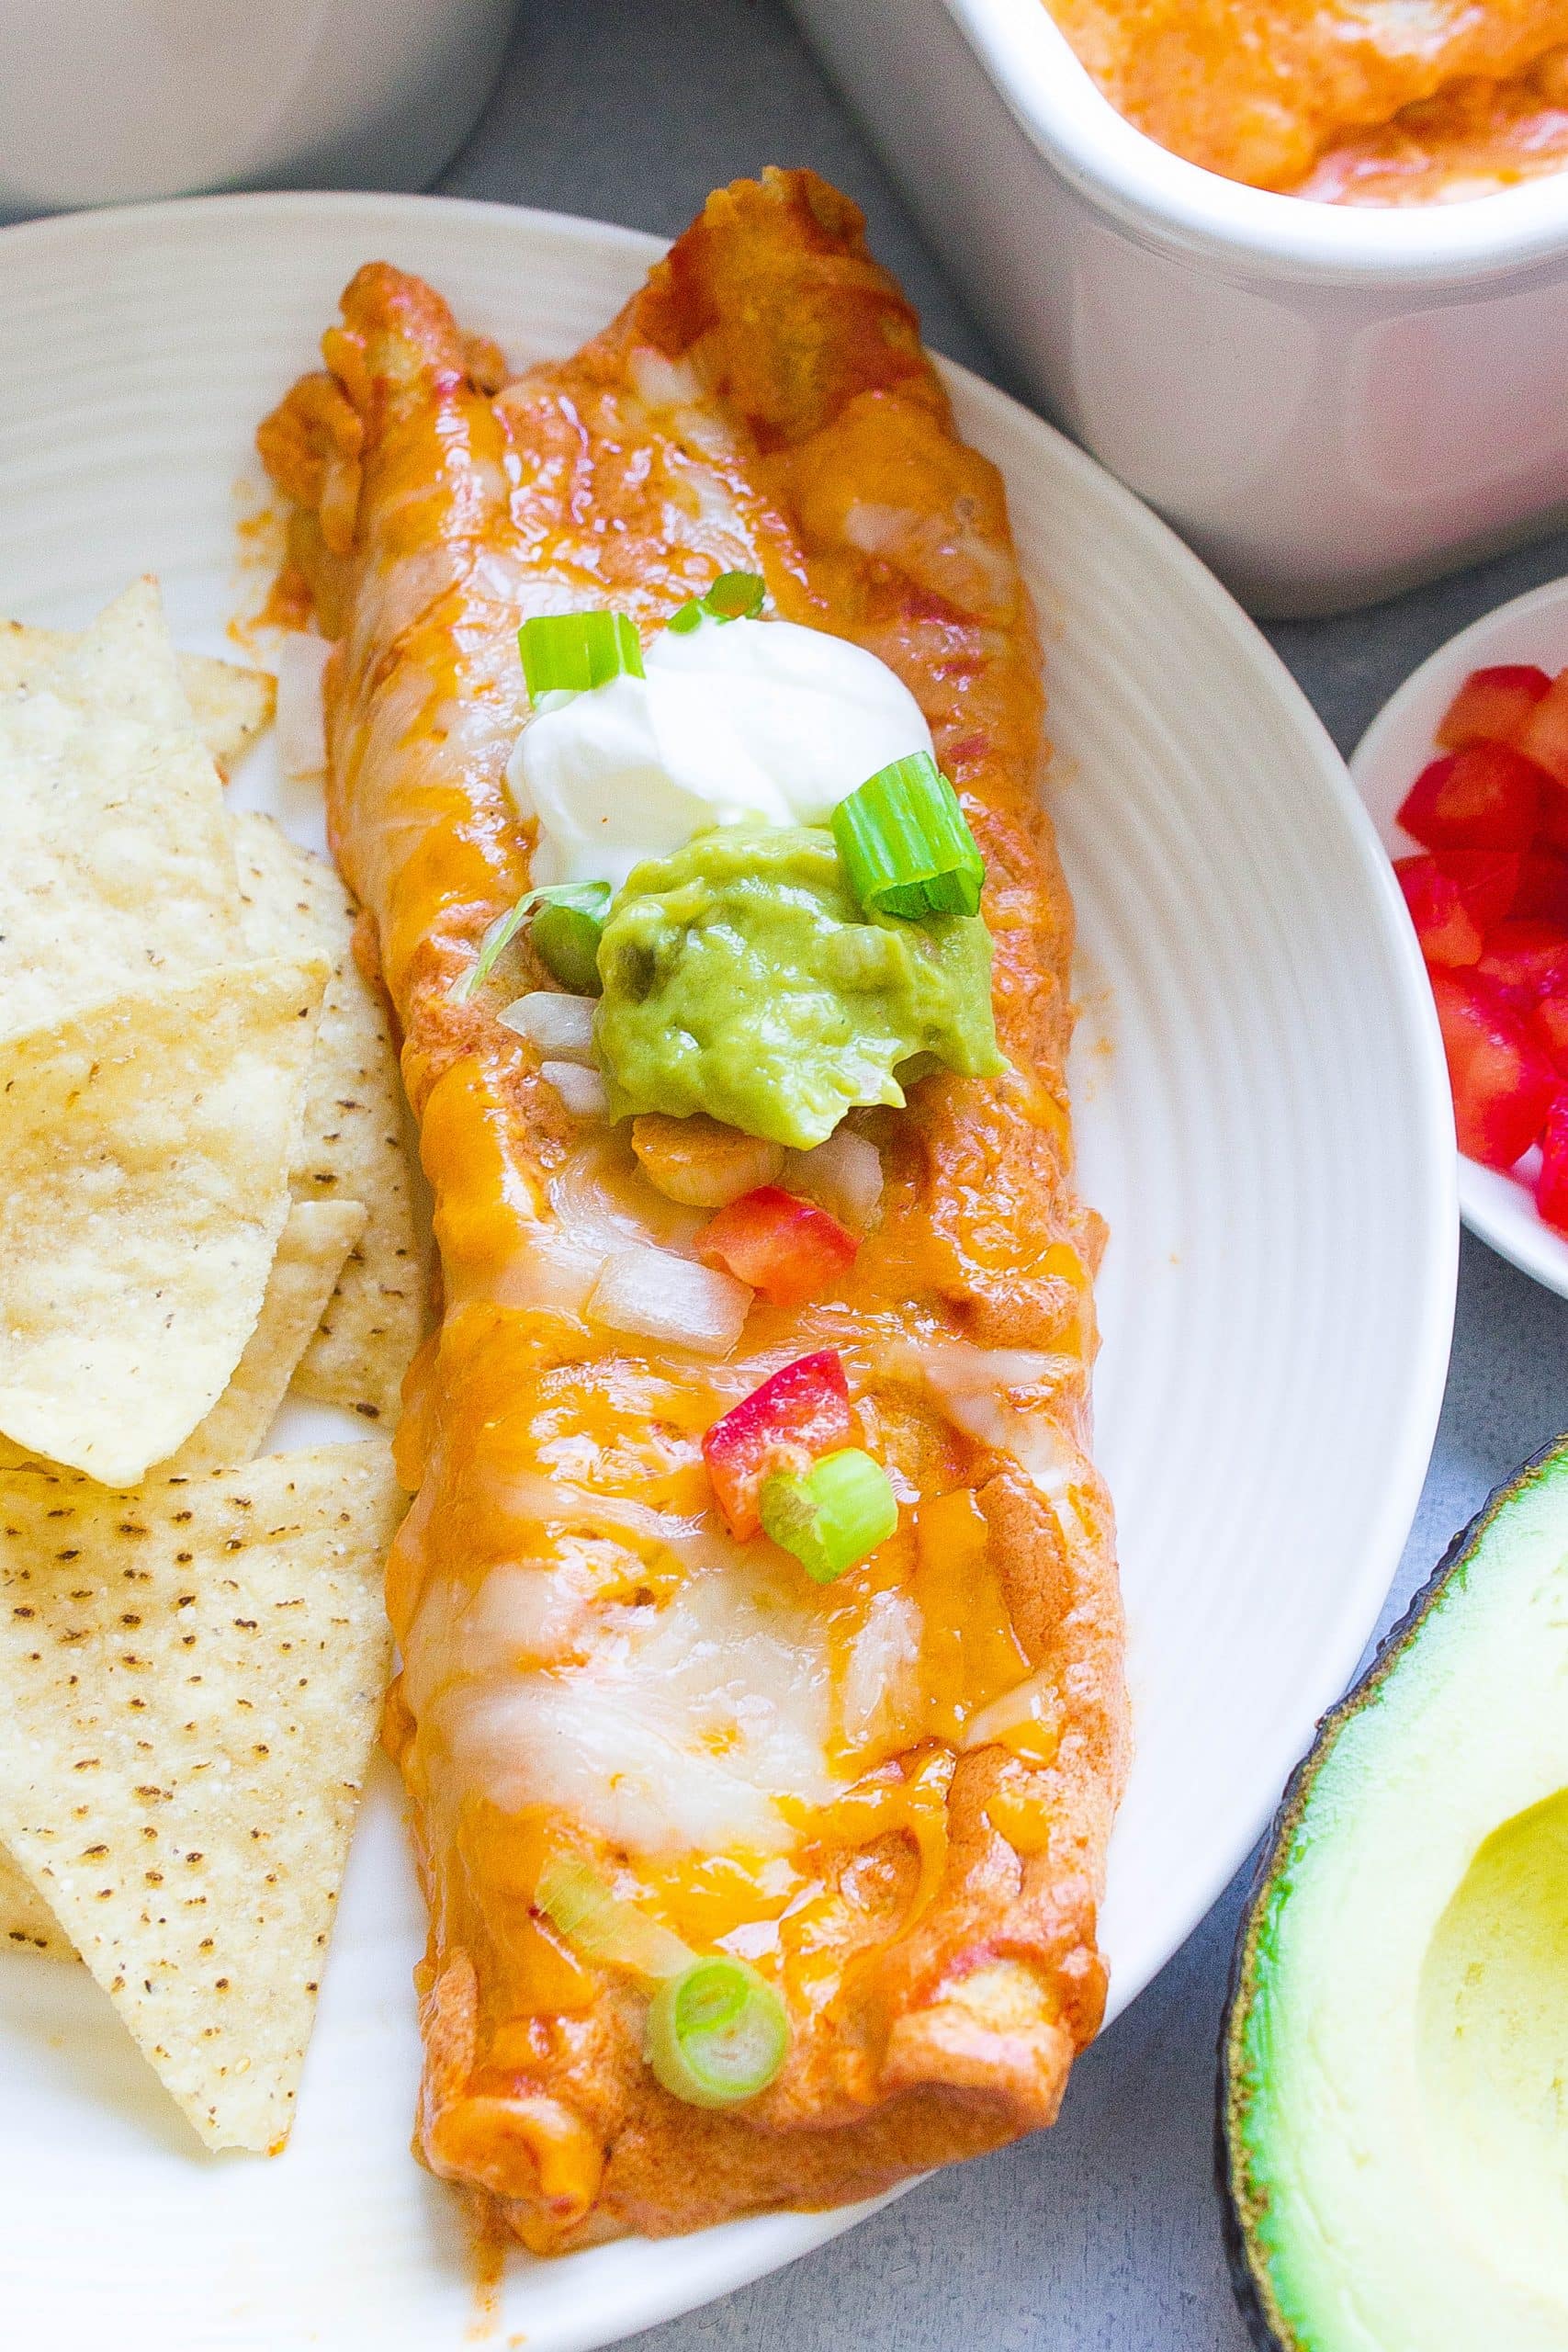 Cheese enchilada with guacamole on top with a side of tortilla chips.